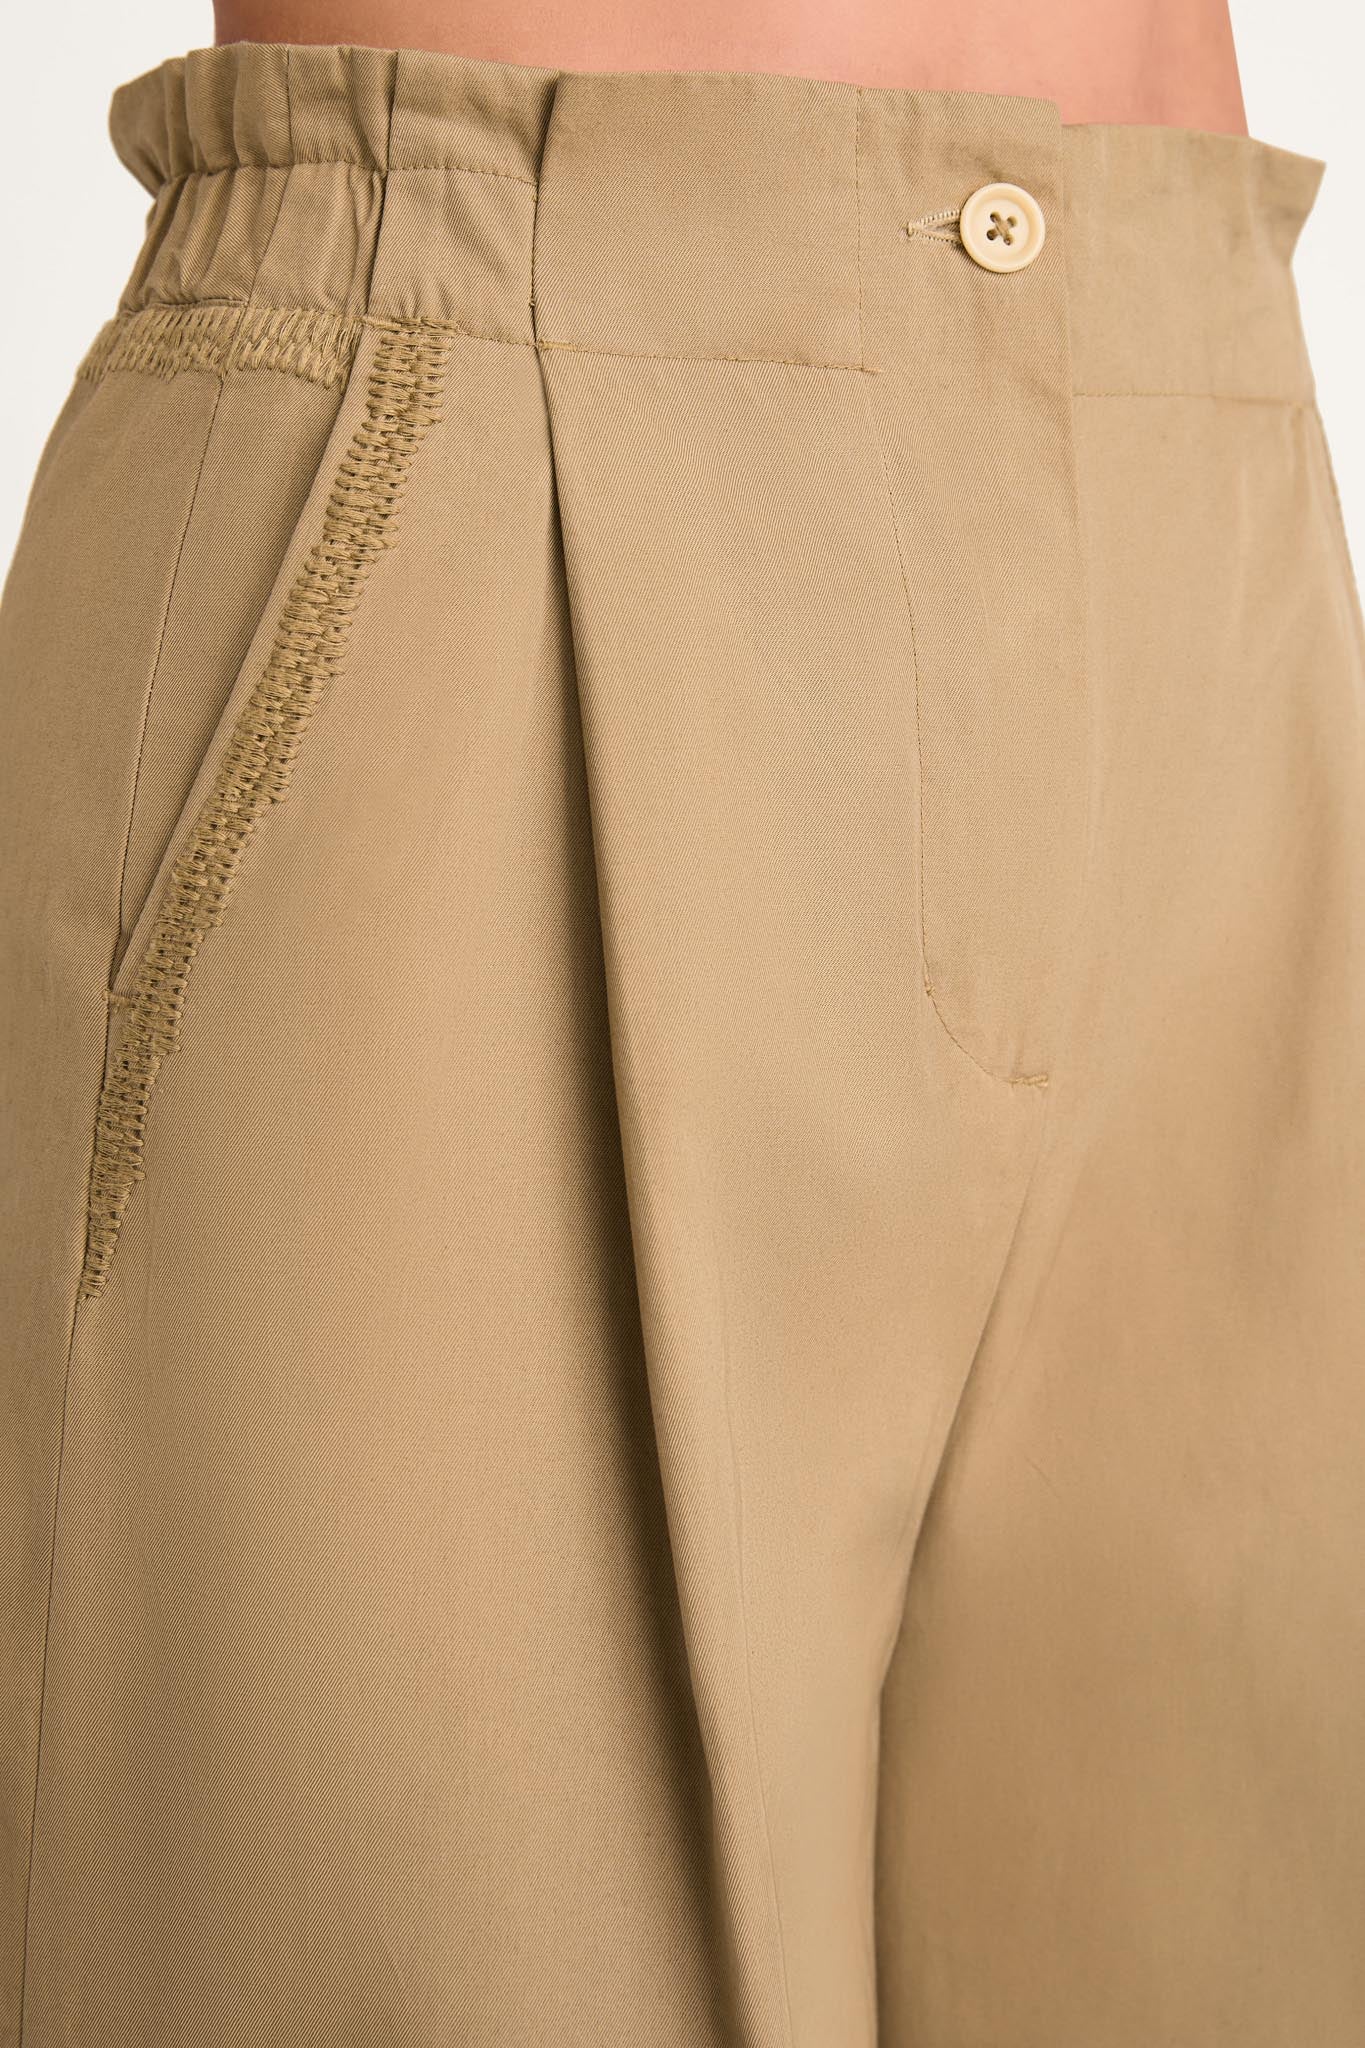 Sargent Emb Pant in Driftwood